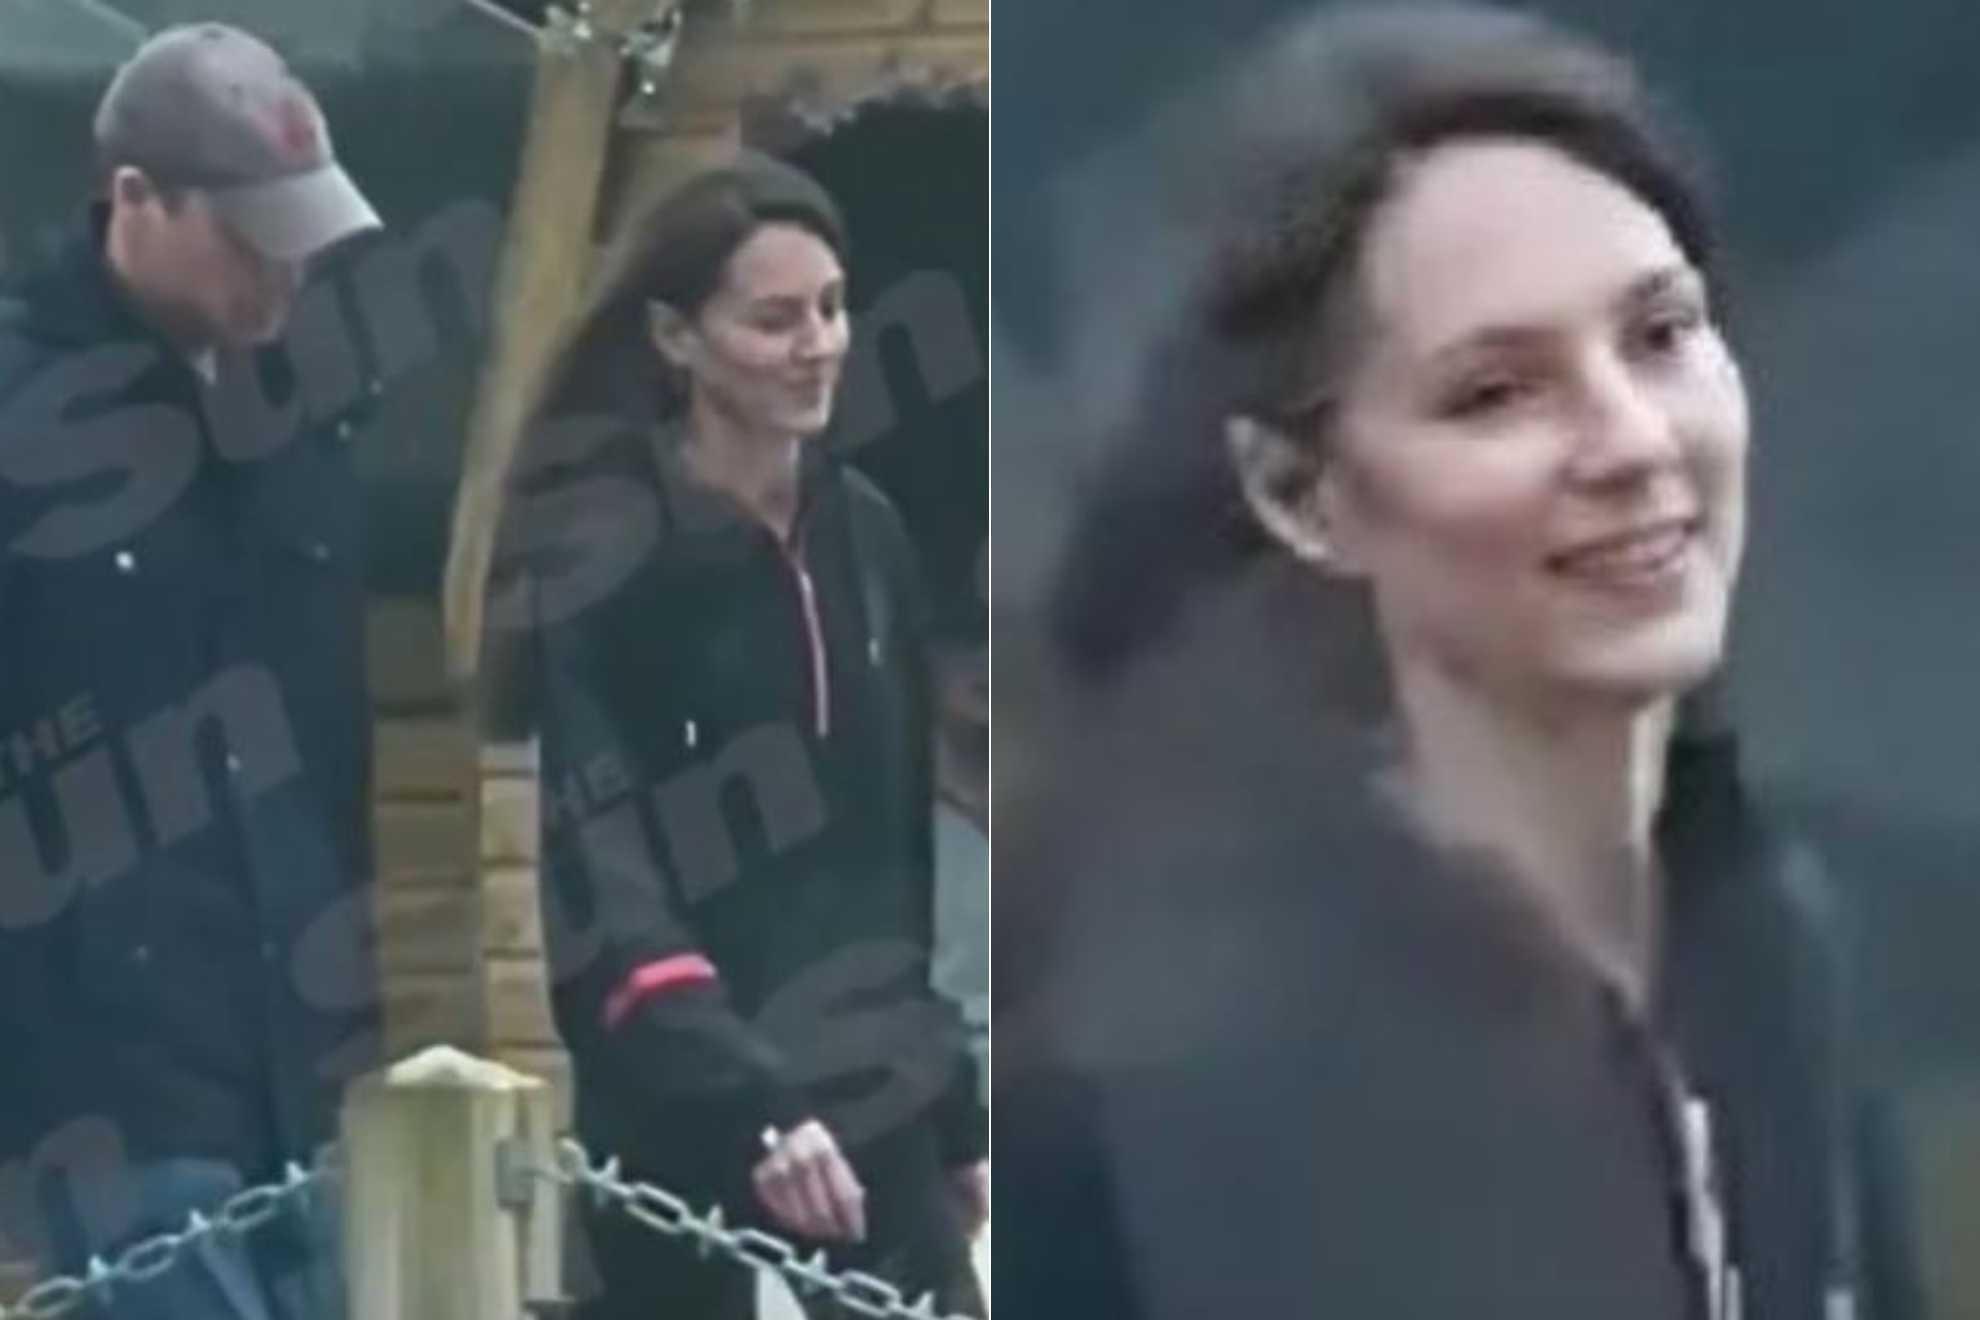 Kate Middleton under the spotlight: Fans give more reasons as to why the woman in the video is not the Princess of Wales